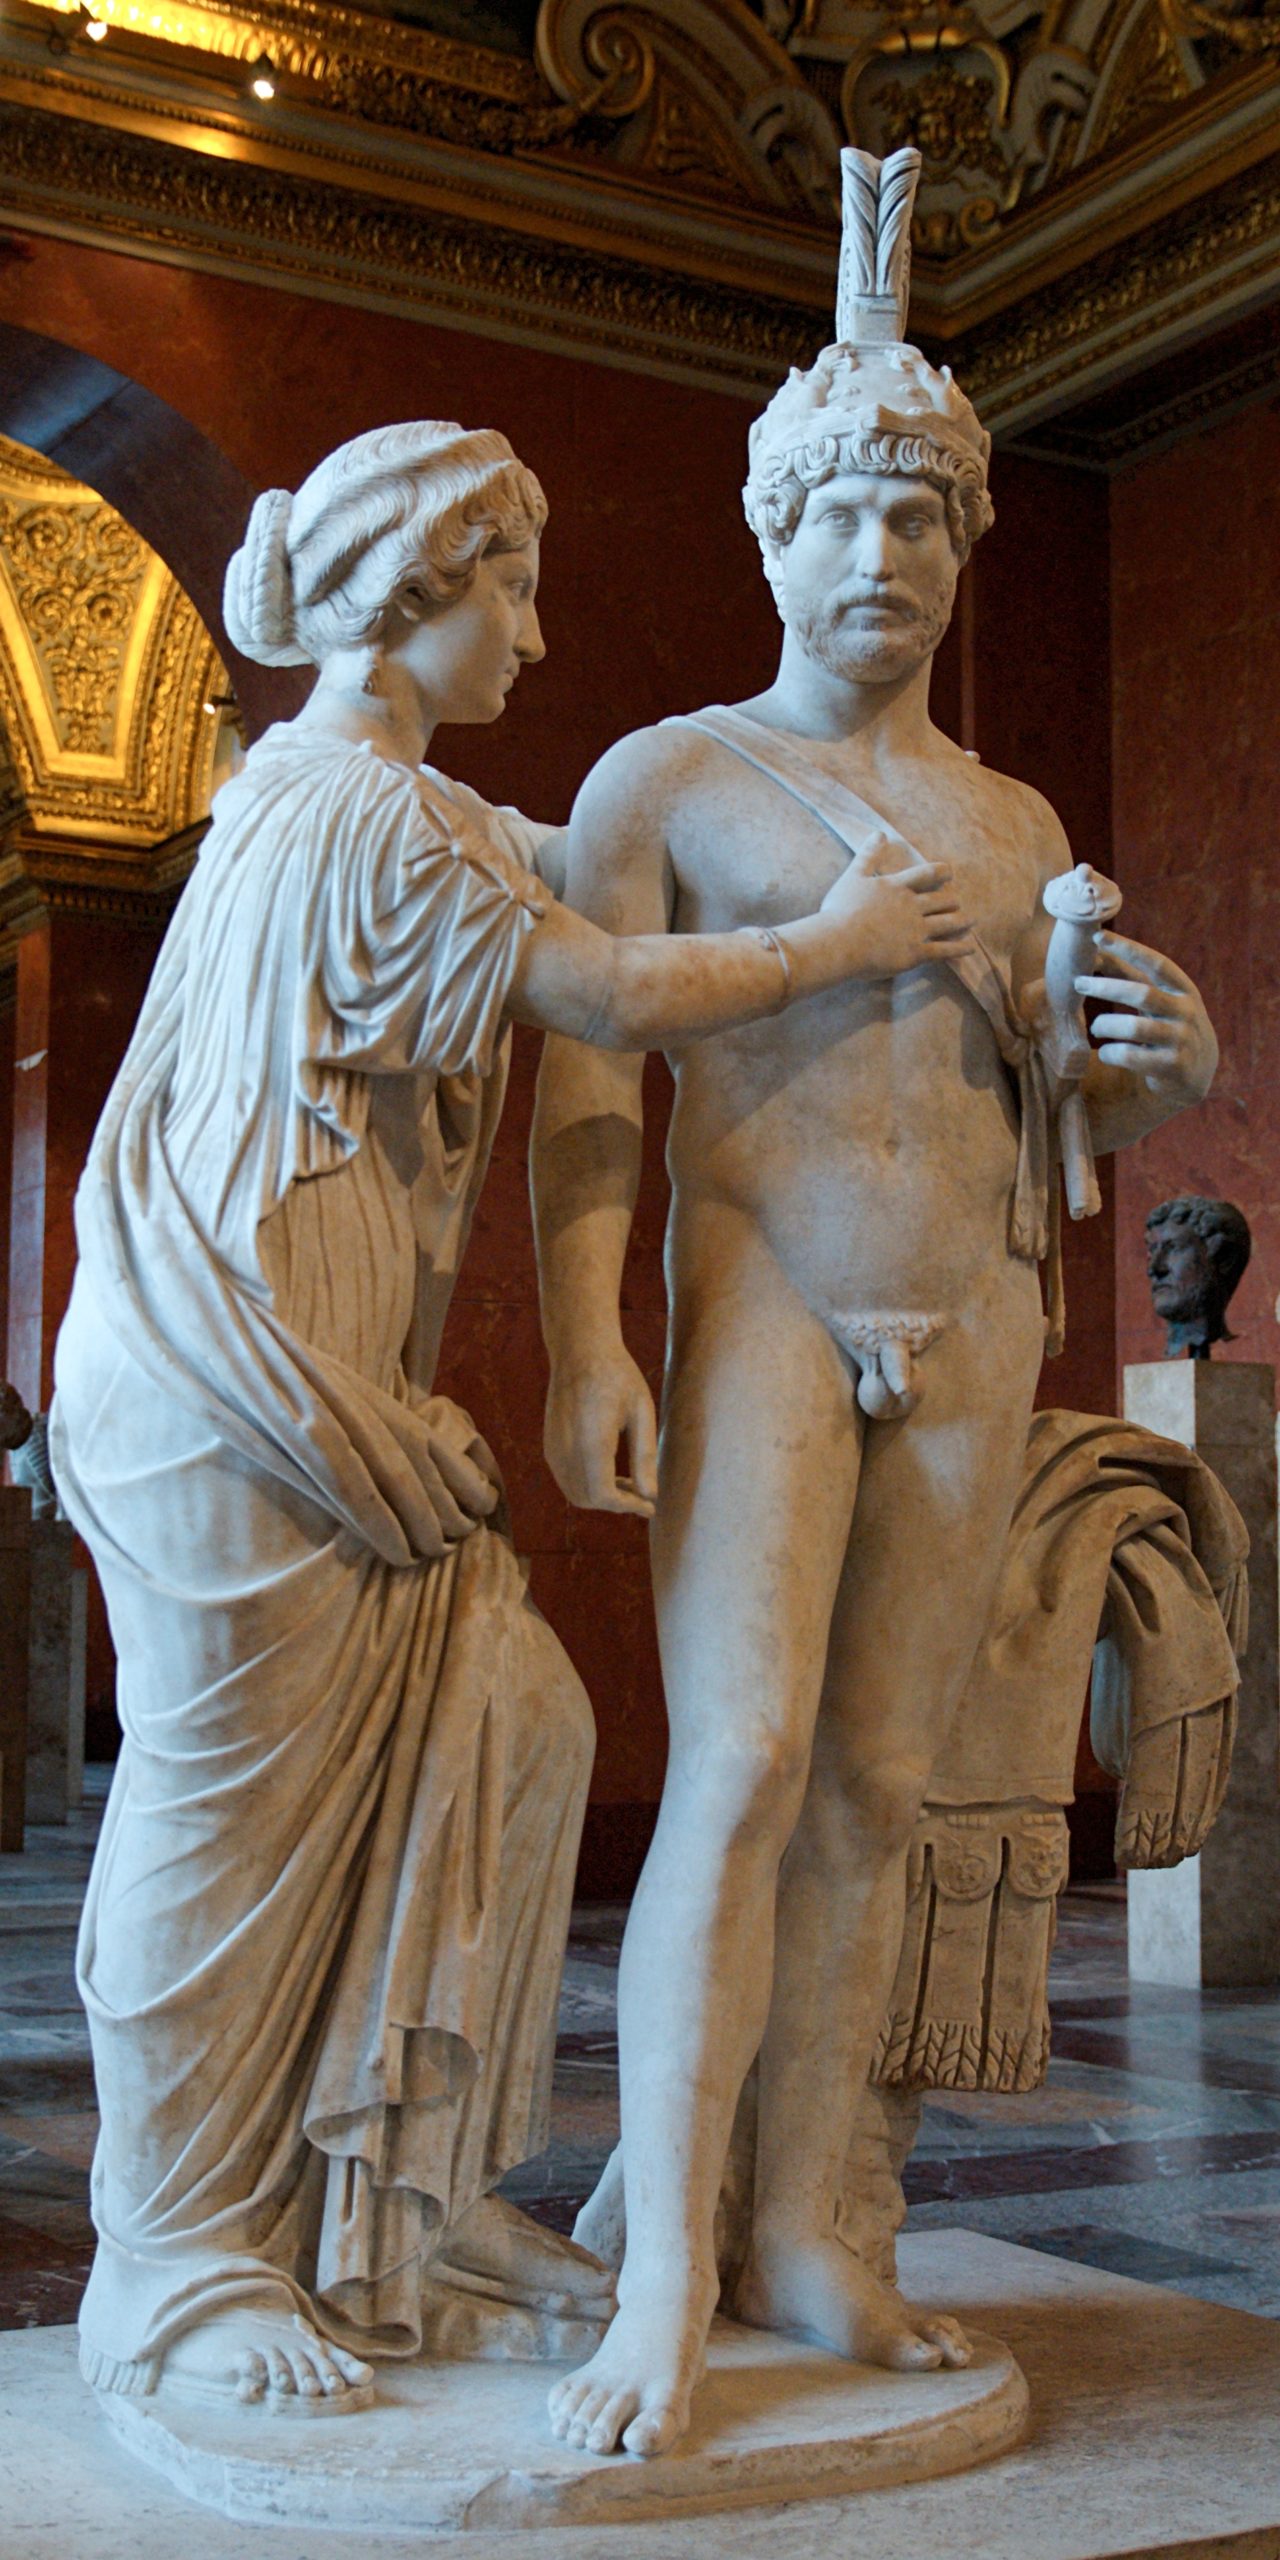 A robed woman stands with her arms around the nude figure of Hadrian. Hadrian is posed like Mars, with a sword at his side and a helm.